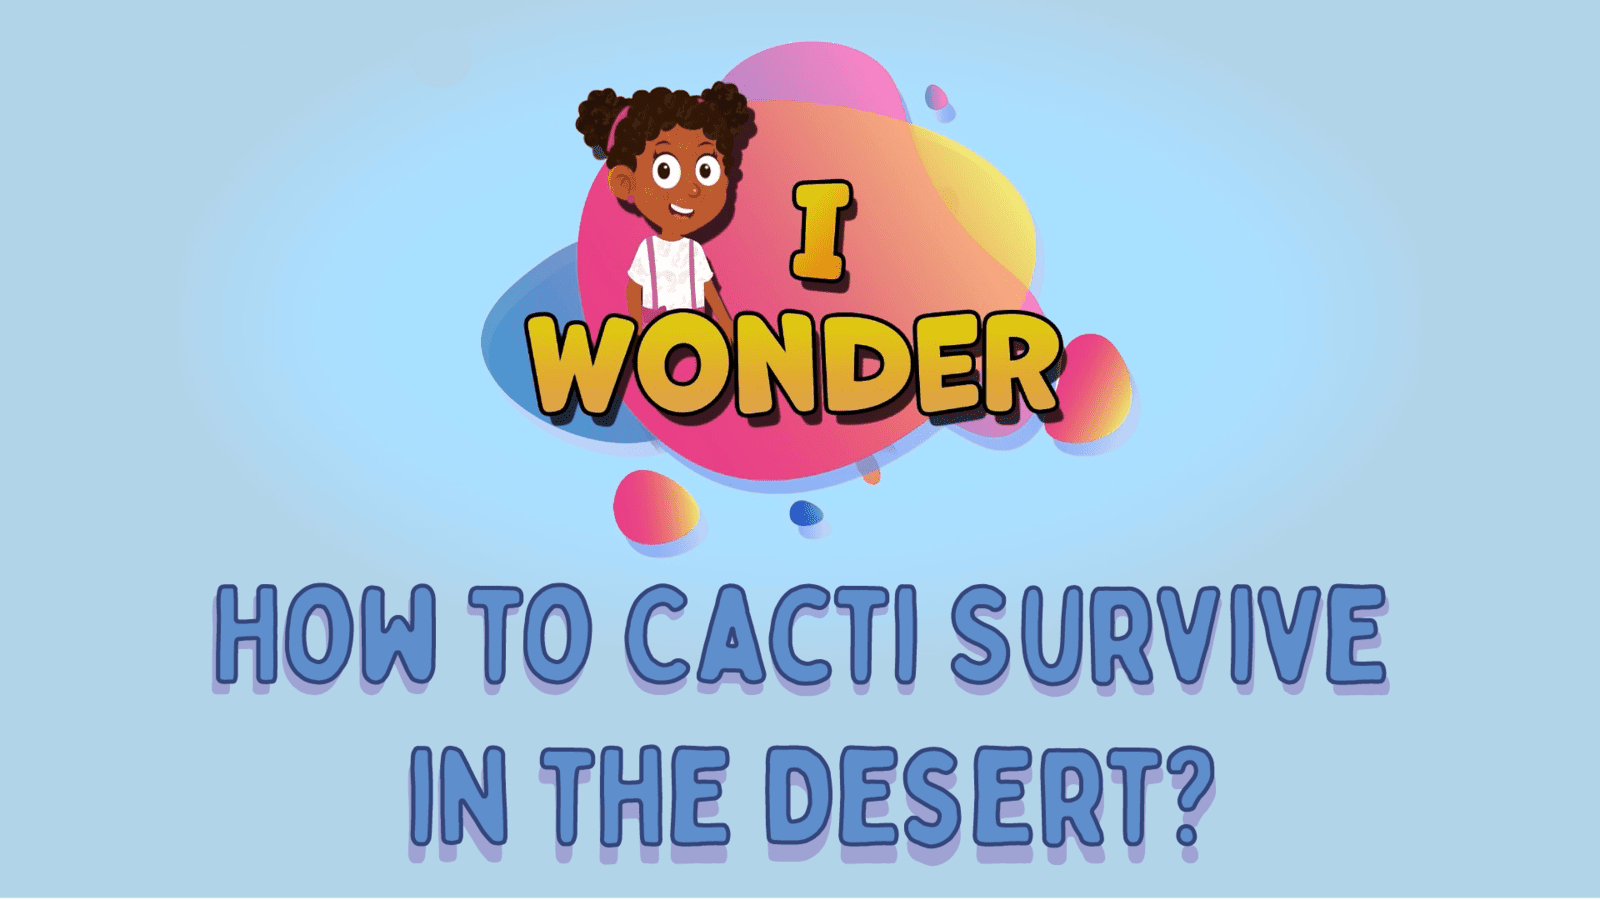 How Cacti Survive In The Desert?